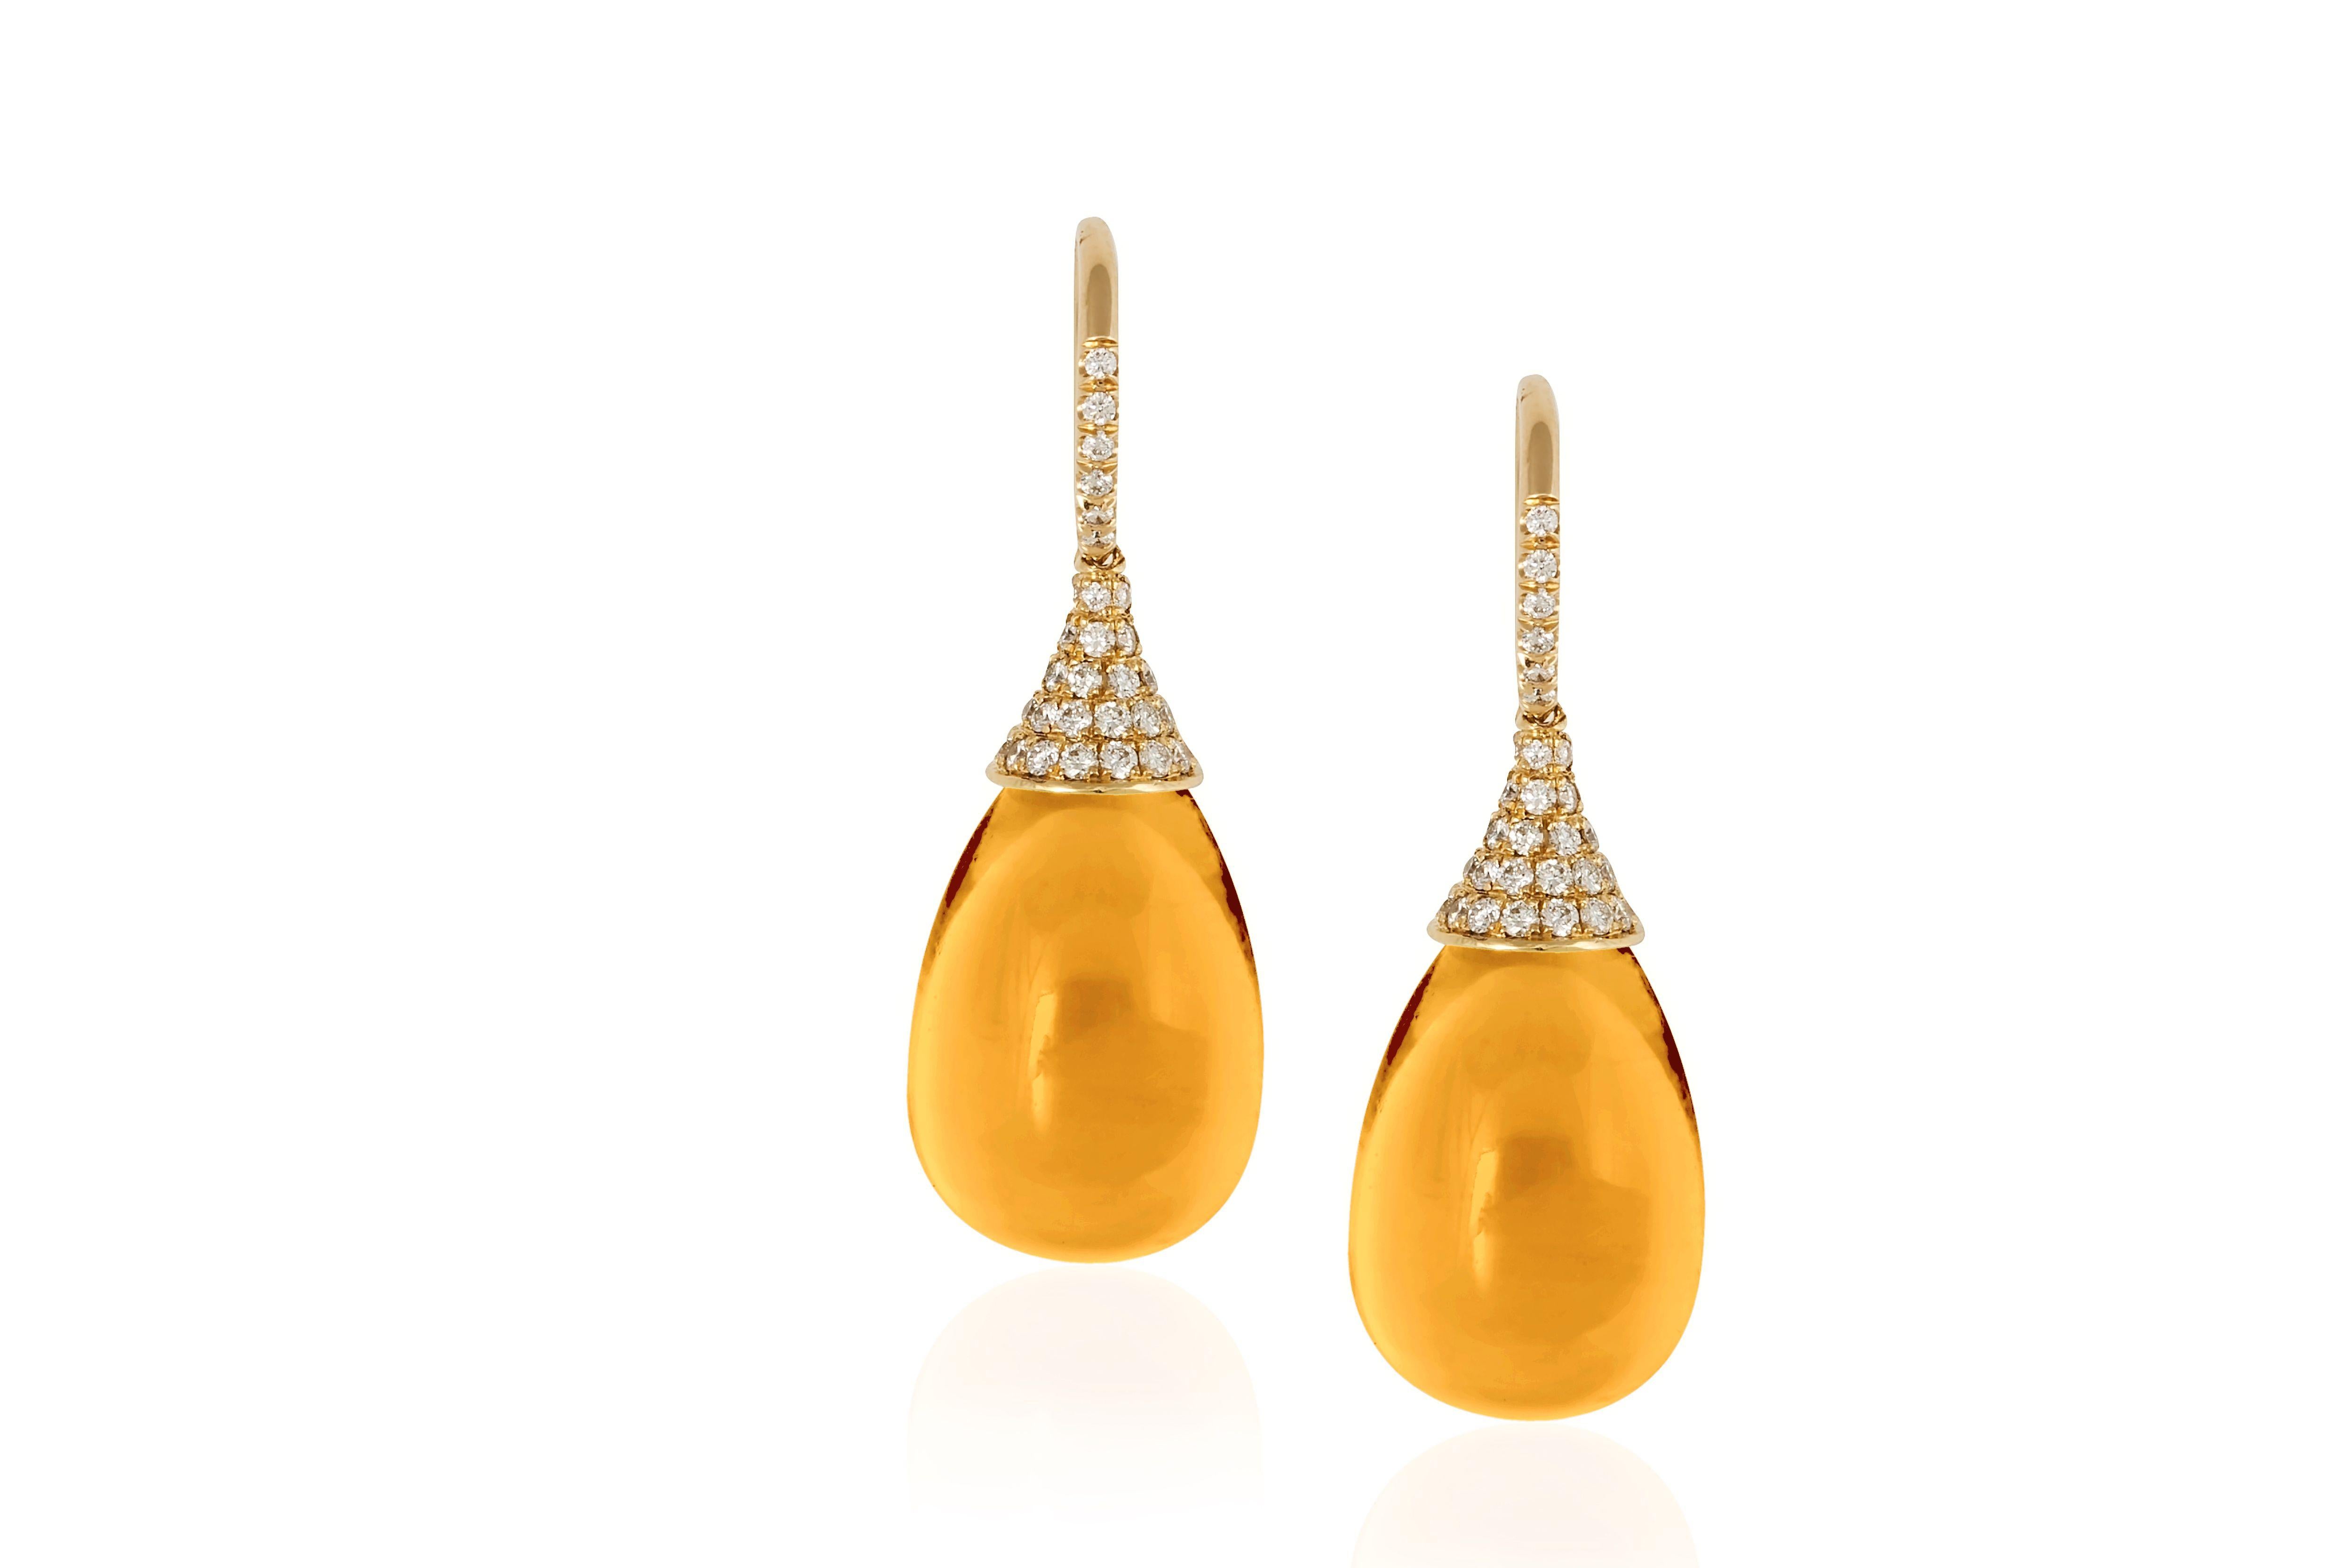 Citrine Drop Earrings with Diamonds in 18K Yellow Gold from 'Naughty' Collection

Stone Size: 19 x 12 mm 

Diamonds- G-H / VS, Approx Wt:0.75 Cts